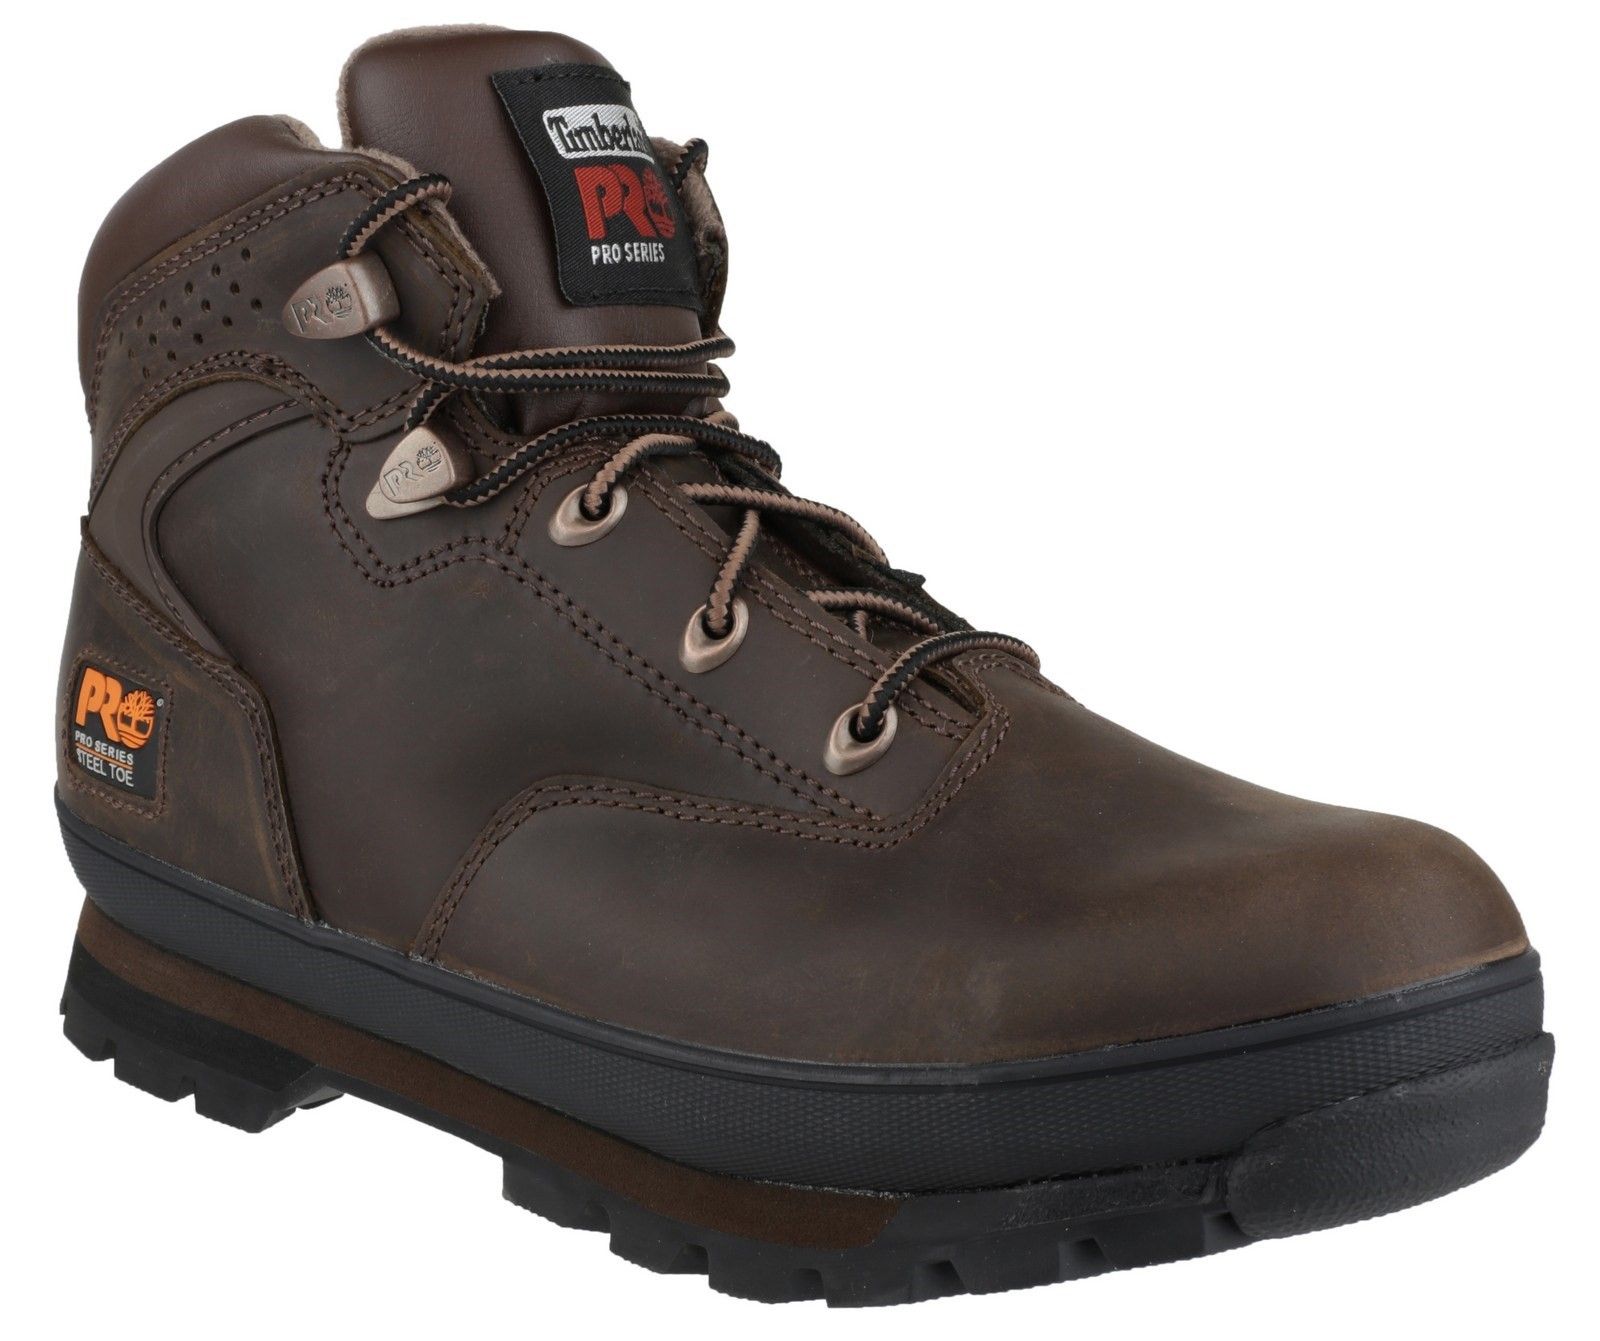 A MODERN CLASSIC: The Timberland PRO Euro Hiker features a timeless silhouette that speaks to Timberlands heritage, but is now built with a wider sole platform and a lower center of gravity, providing stability and increased traction on surfaces.Impact and compression resistant toe cap. 
Penetration resistant to 1100 Newtons for flexible underfoot protection. 
Heel energy absorption 20 Joules. 
High heat resistance to 300 degrees. 
Slip resistance SRB - Resistance against slipping on smooth steel surfaces covered with water and cleaning products.